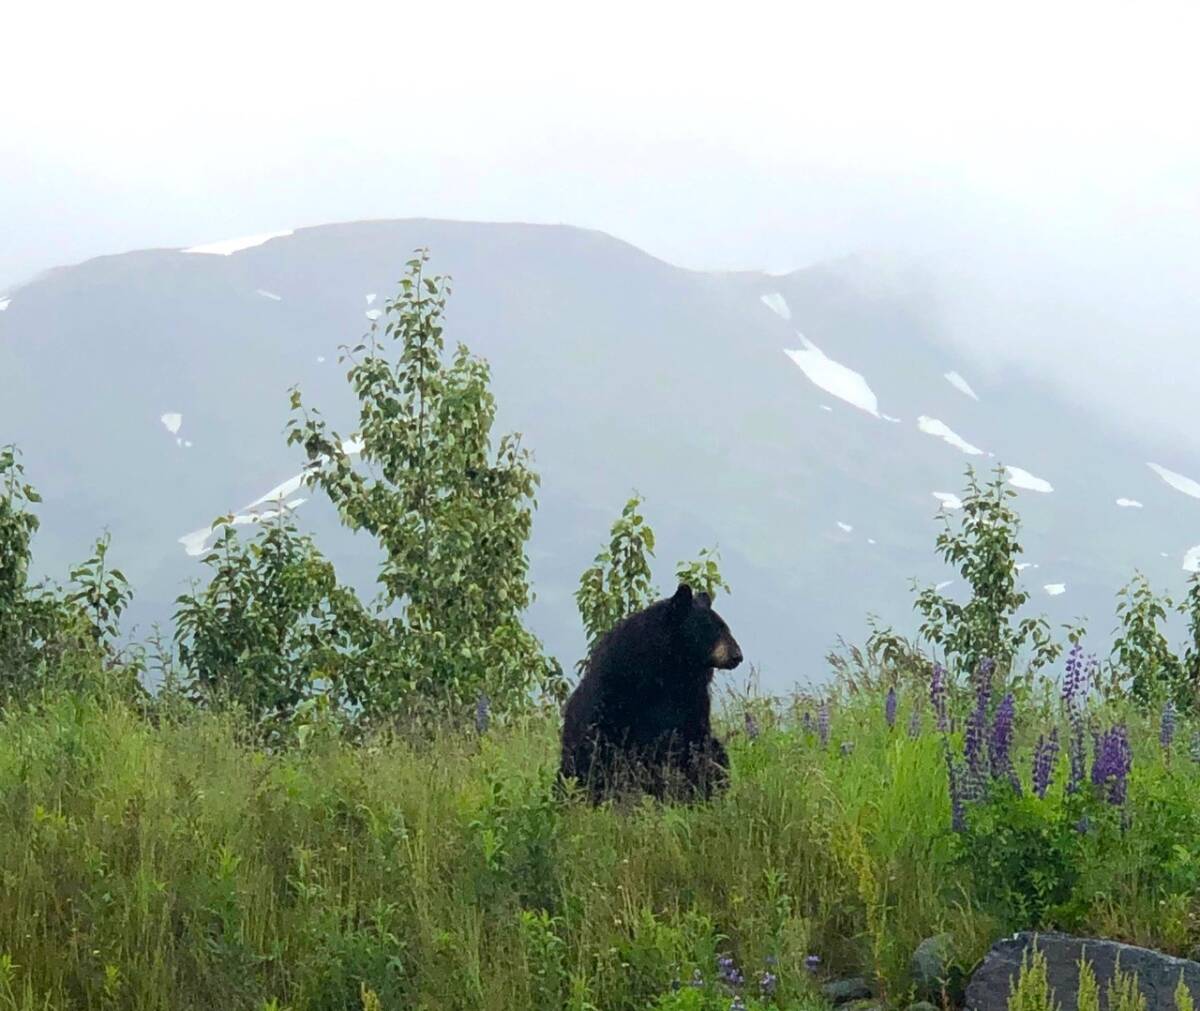 An Alaskan black bear in the countryside is a highlight on a nature lover's itinerary.